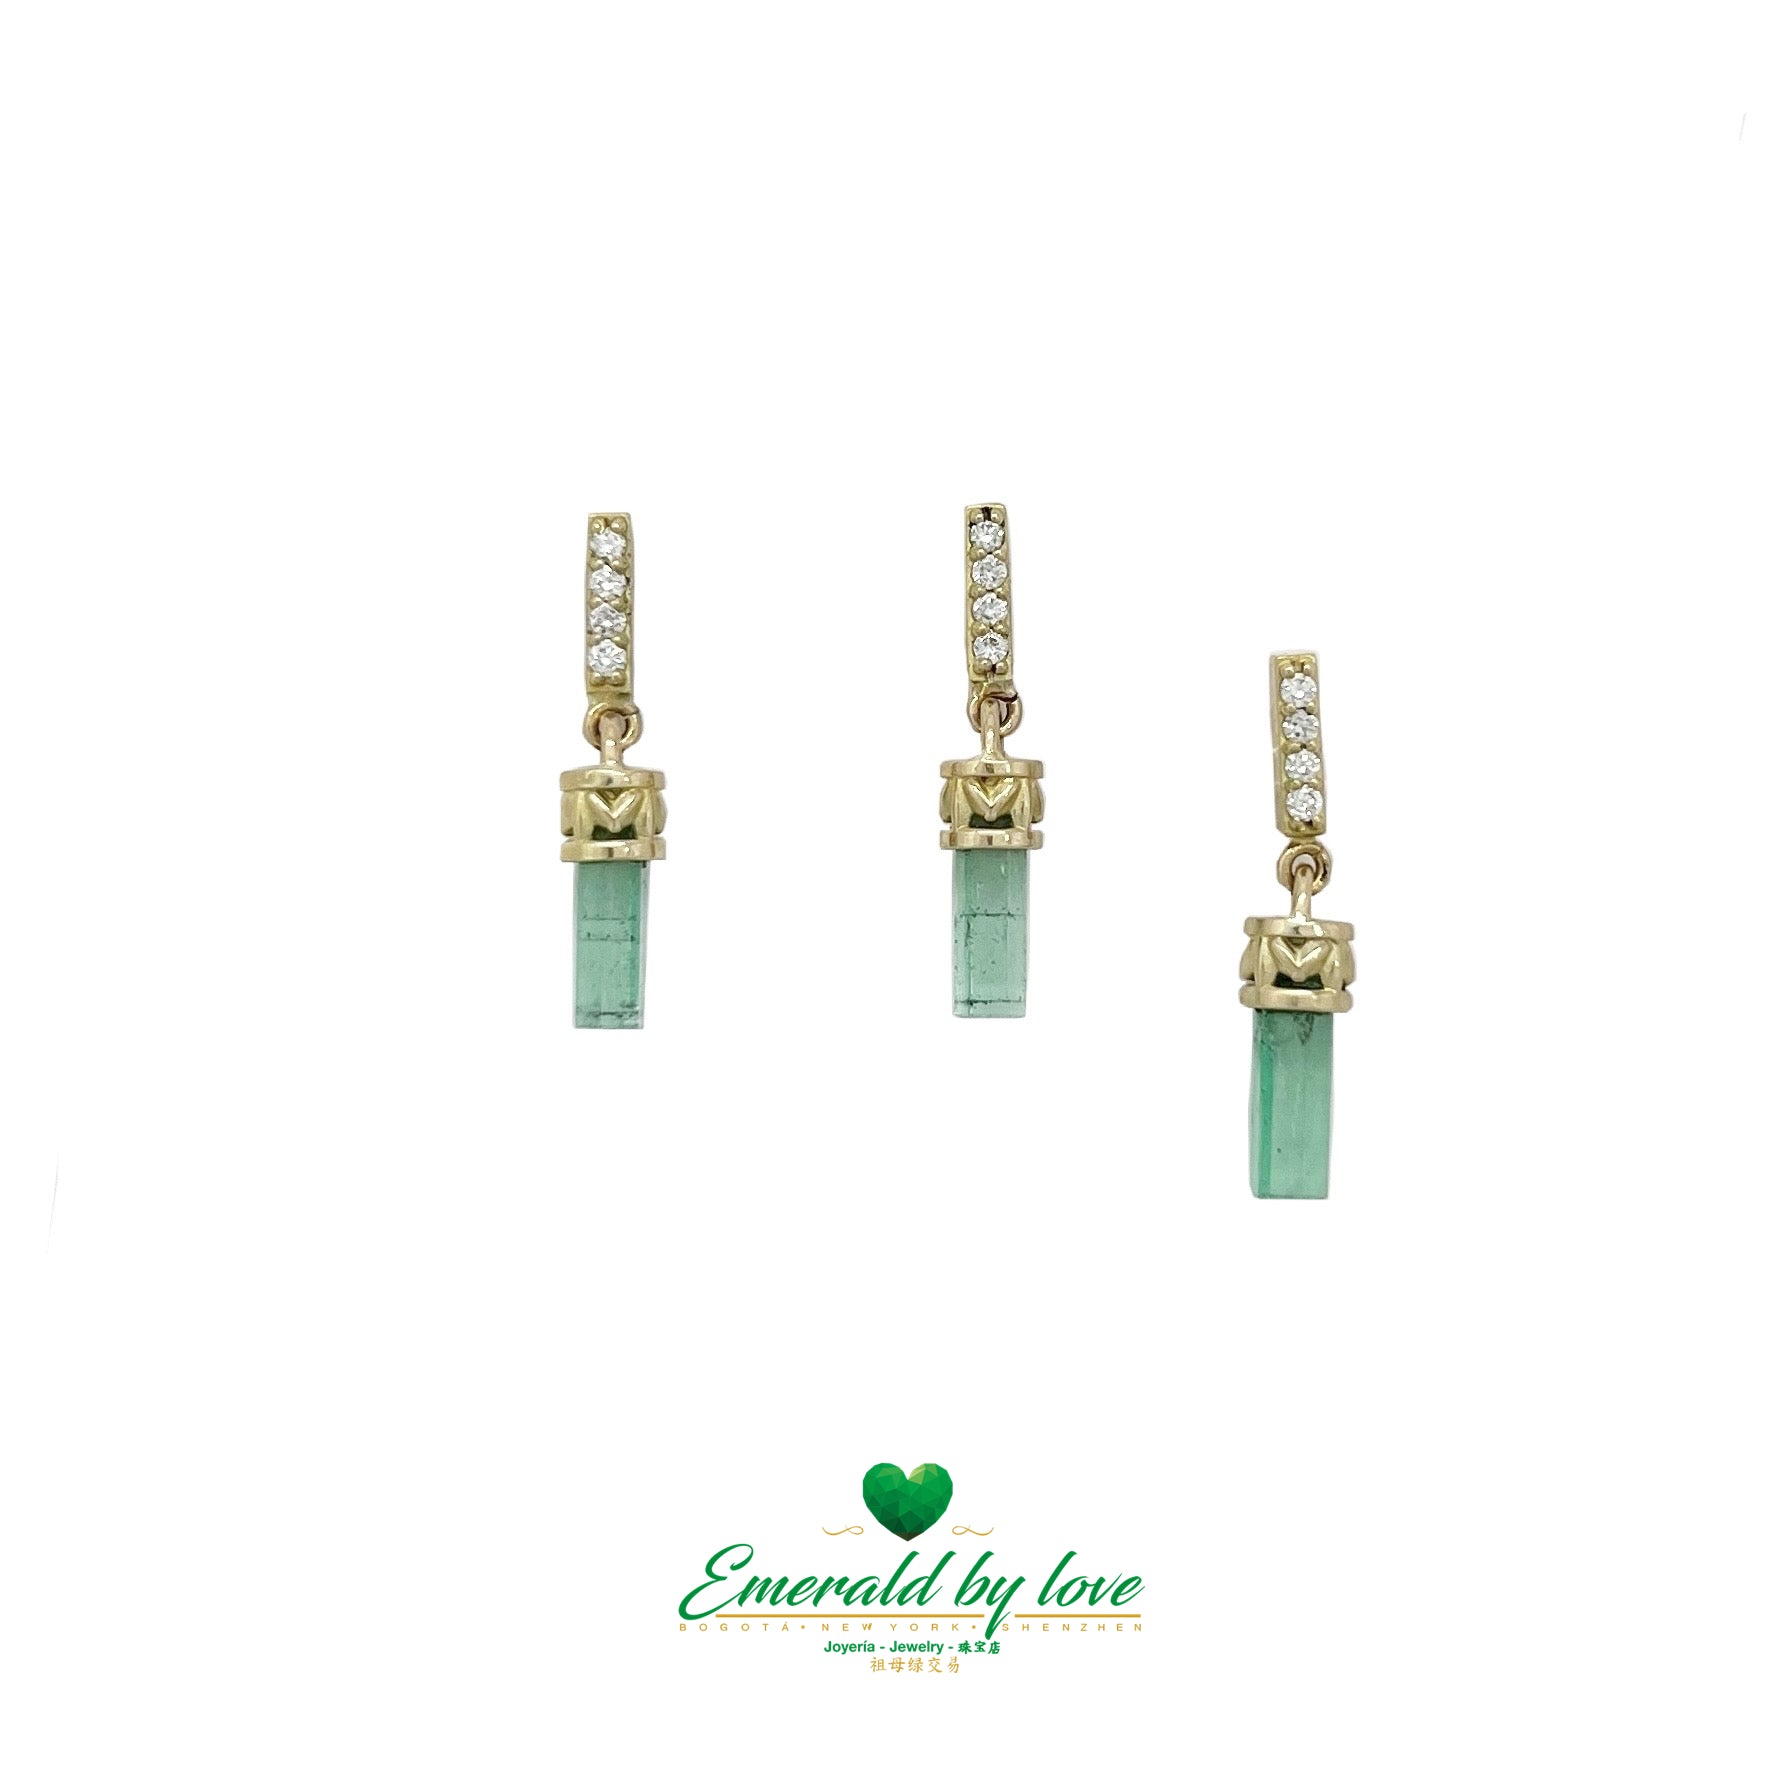 Elongated Rough Emeralds with Diamonds Encrusted in Gold Set